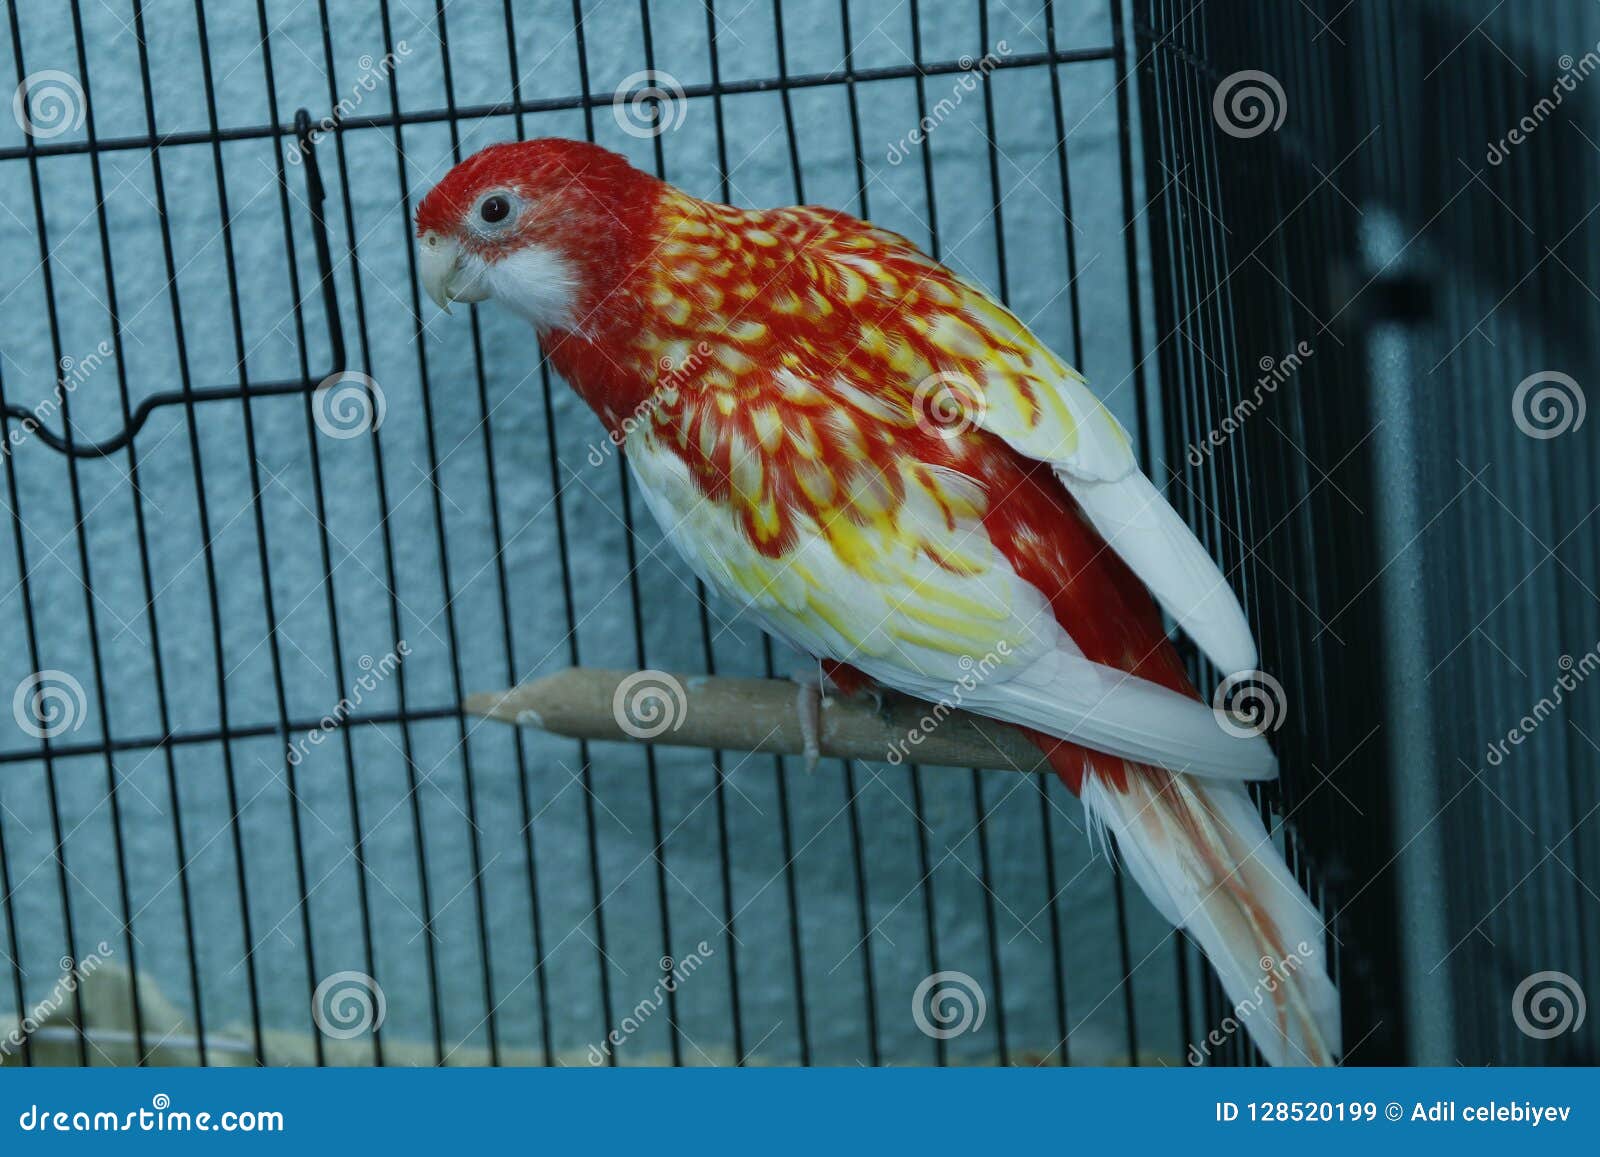 Red Parrot in the Cage . Budgie . Parakeets . Red Wavy Parrot Sits in a Cage . Rosy Faced Lovebird Parrot in a Cage . Birds Insepa Stock Image - of green, parrots: 128520199